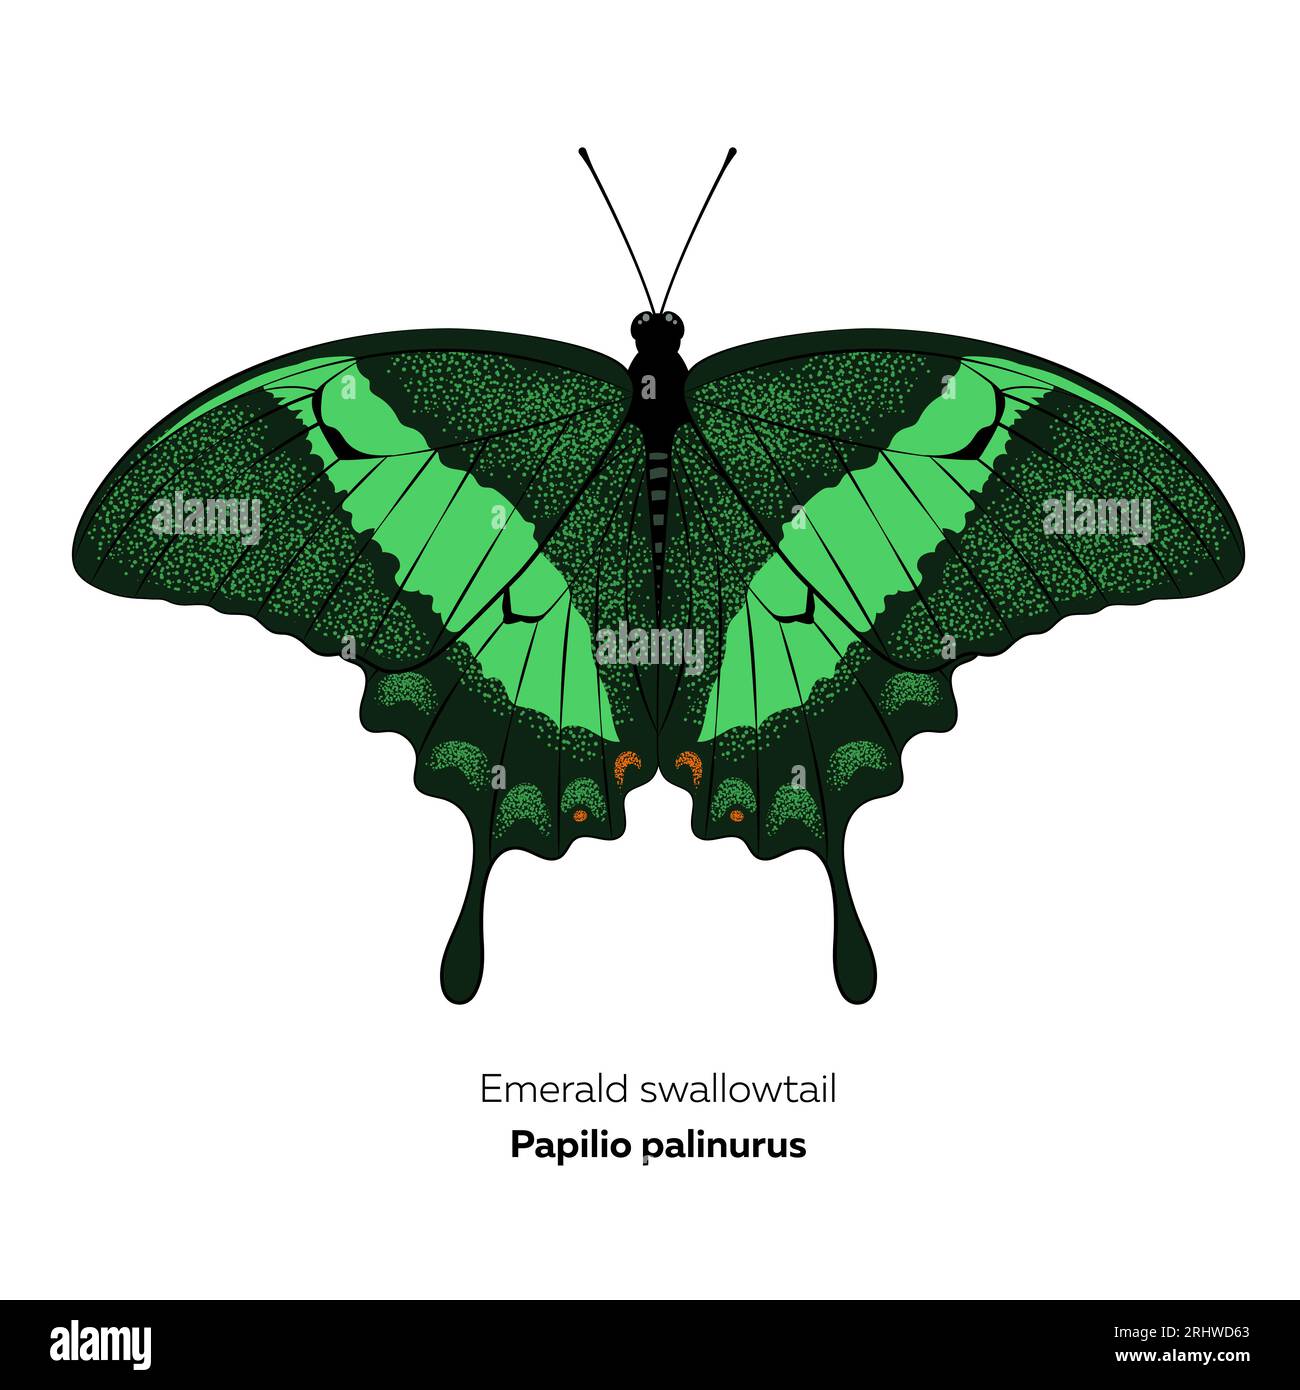 Emerald swallowtail butterfly. Papilio palinurus. Vector illustration isolated on white background. Stock Vector